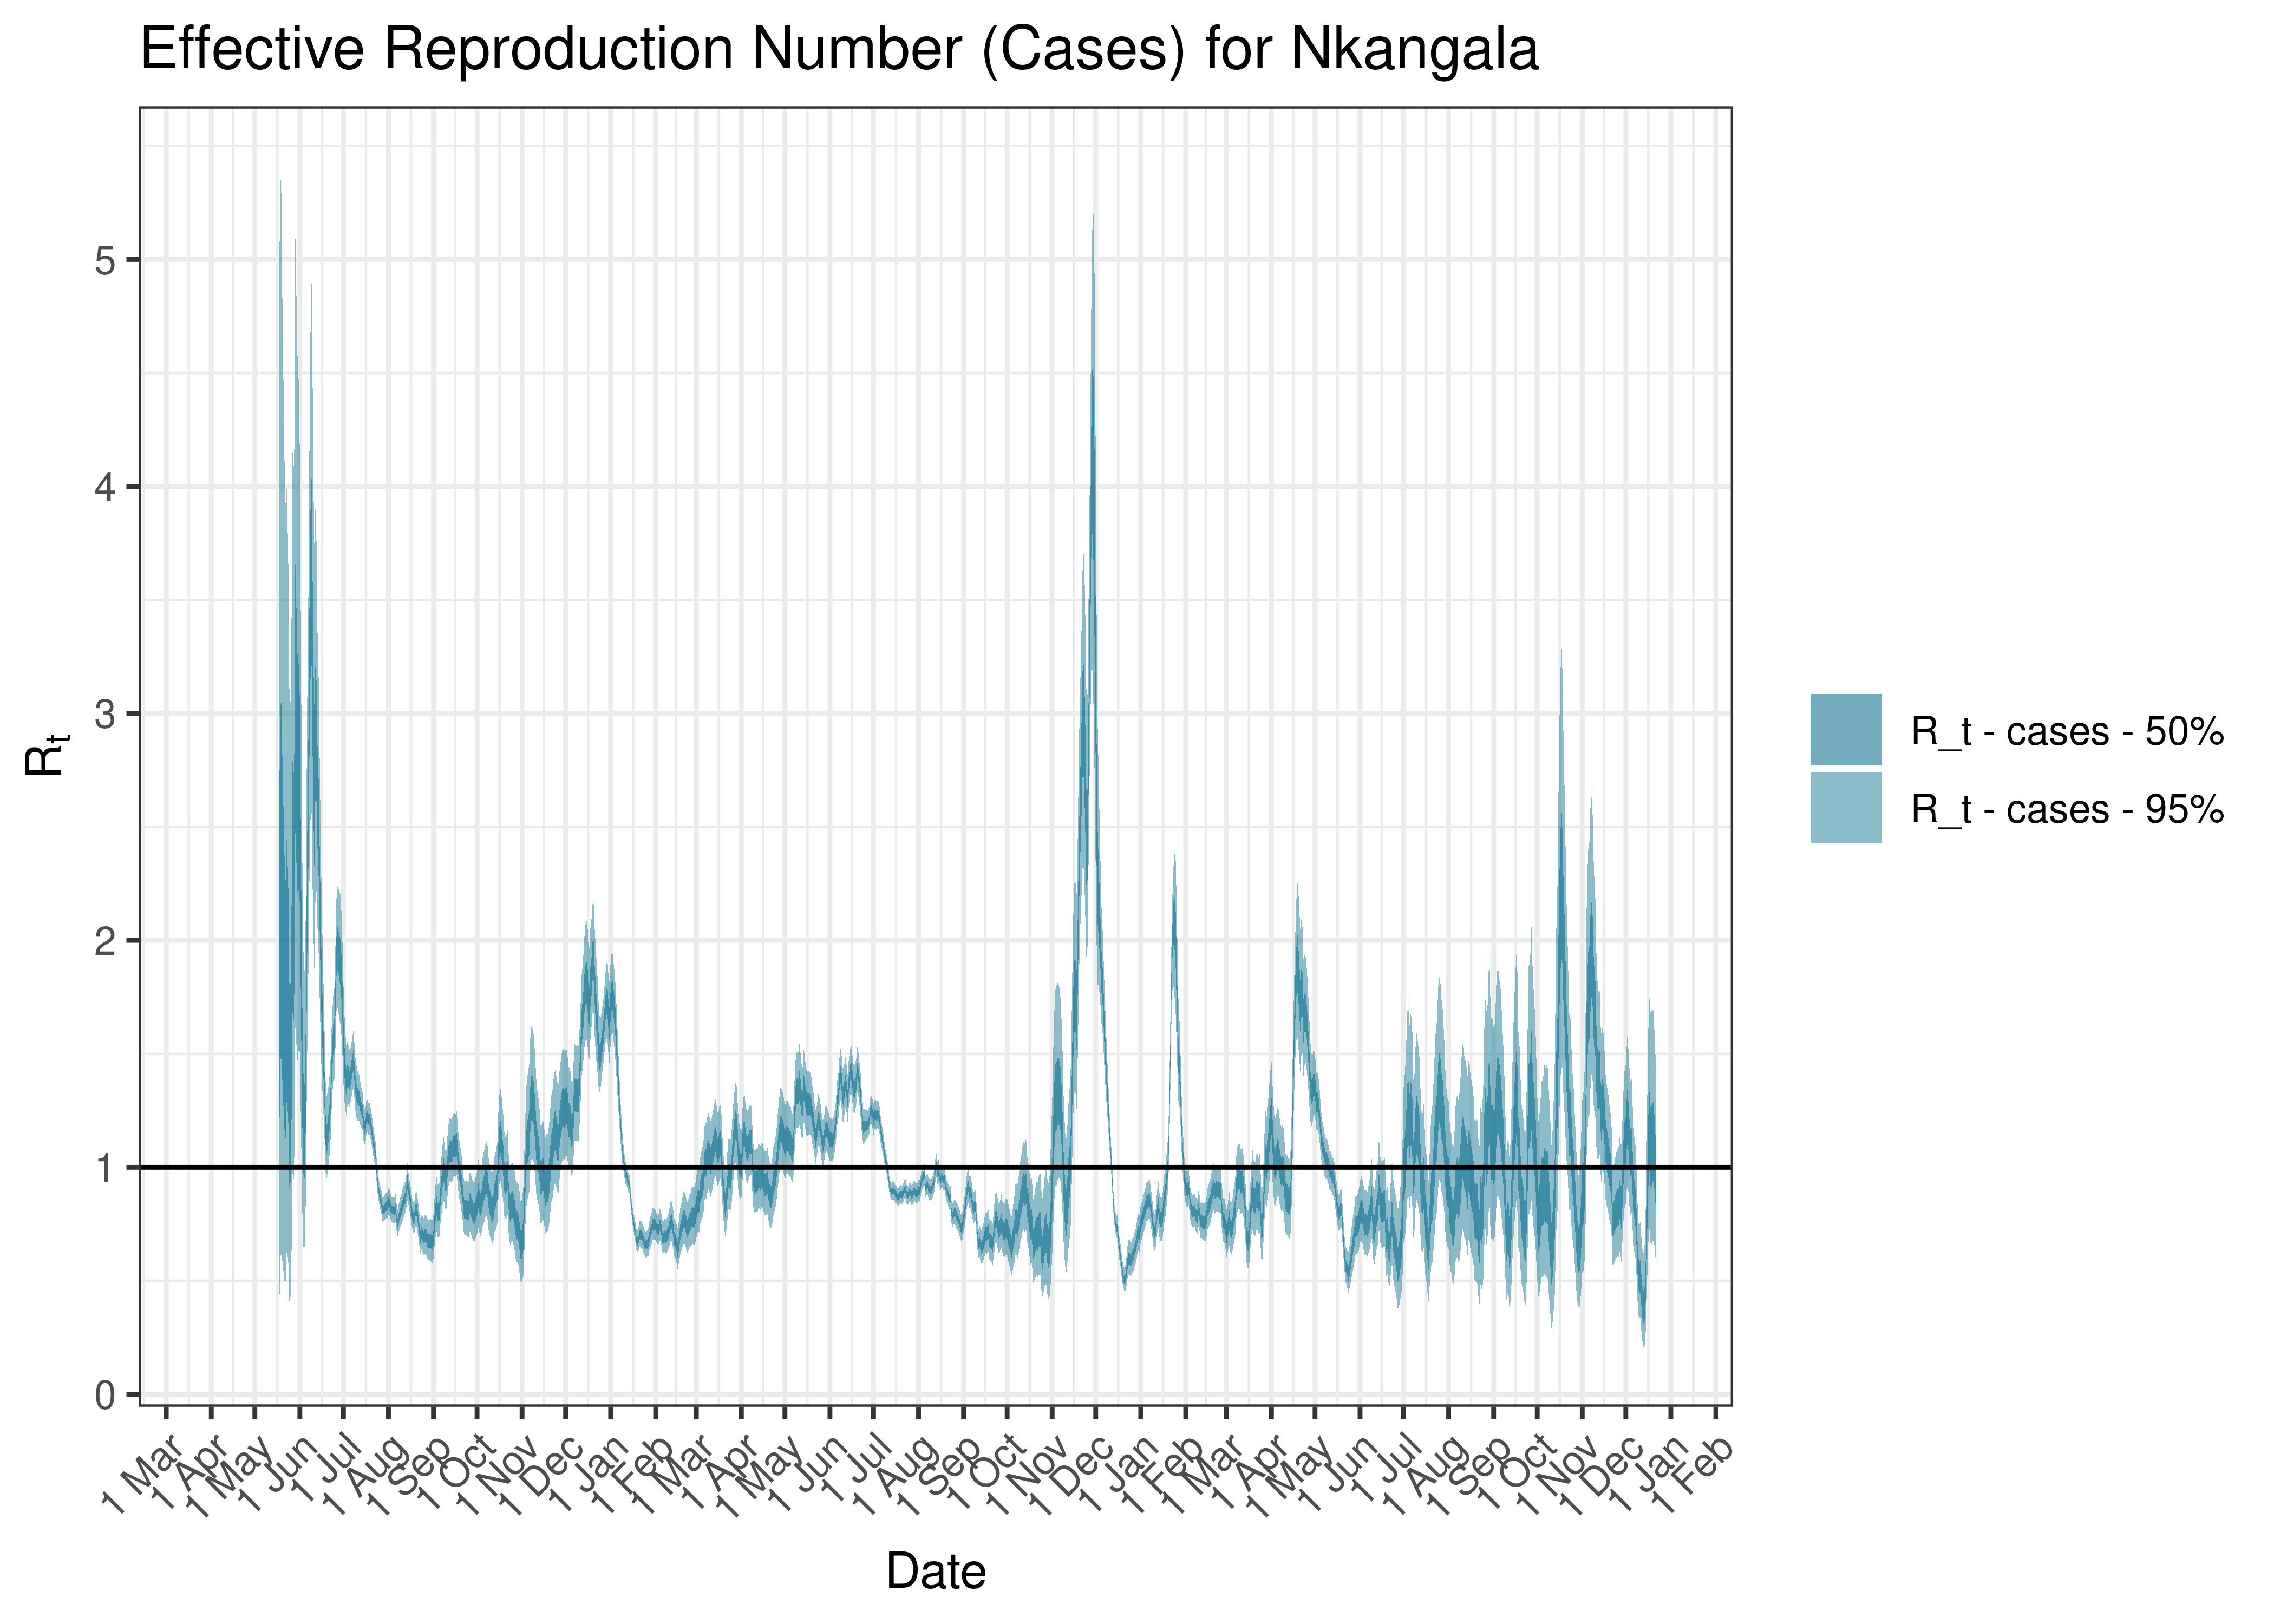 Estimated Effective Reproduction Number Based on Cases for Nkangala since 1 April 2020